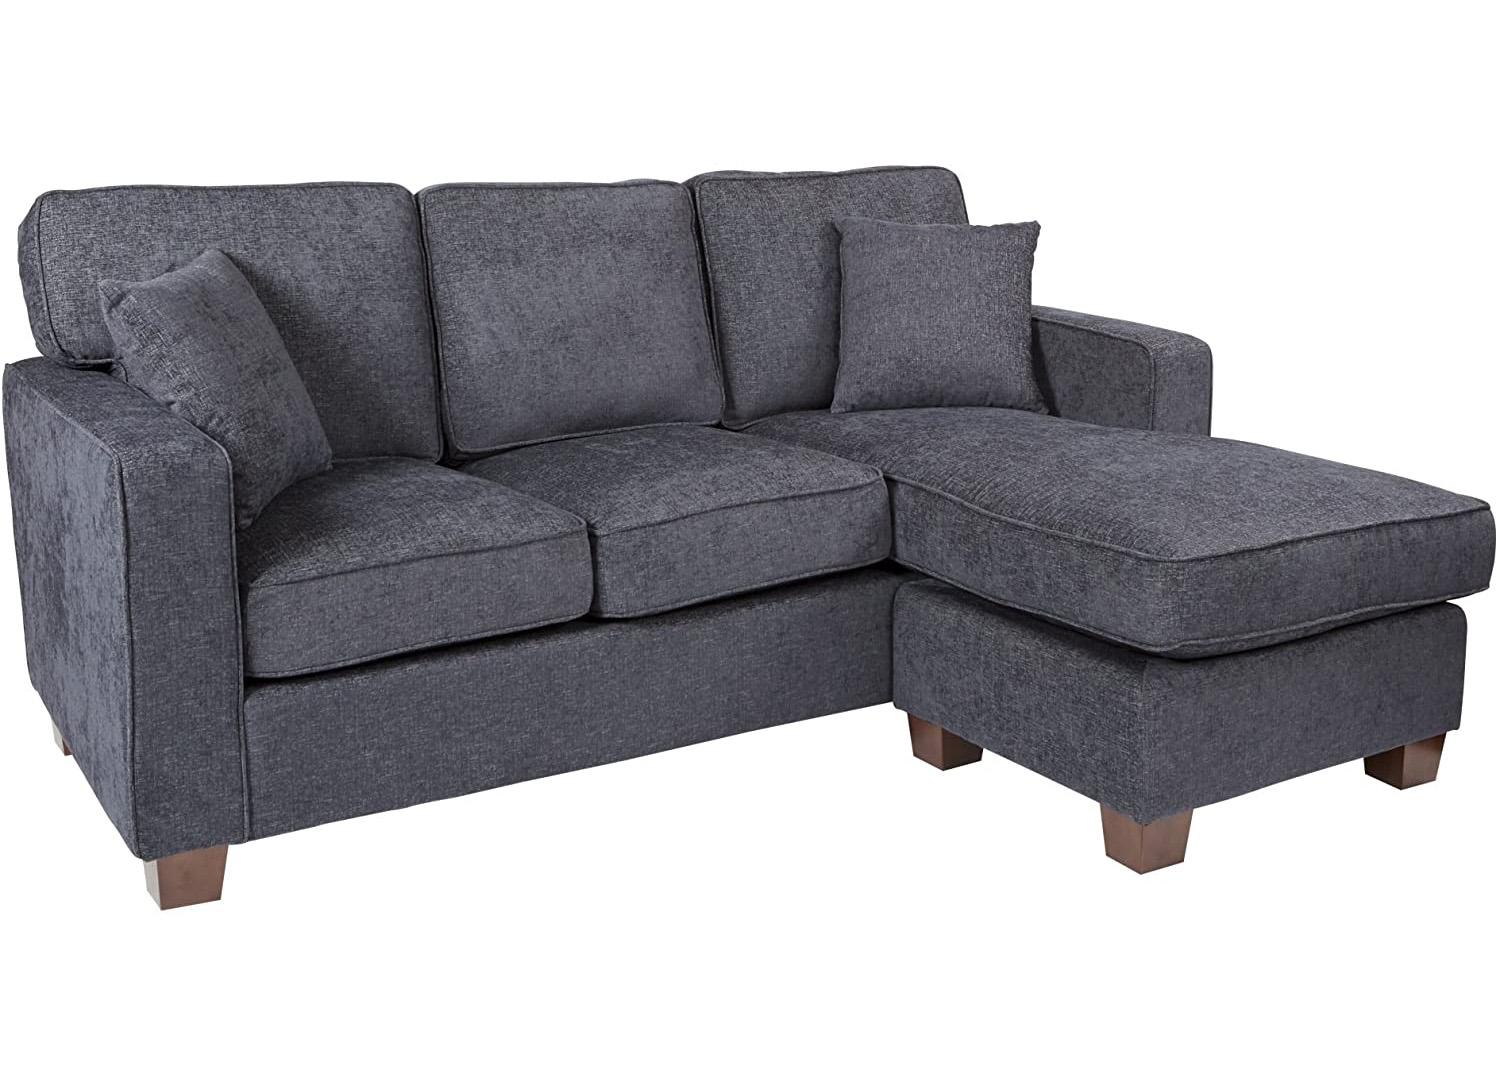 OSP Home Furnishings Russell Reversible Sectional Sofa for $499 Shipped